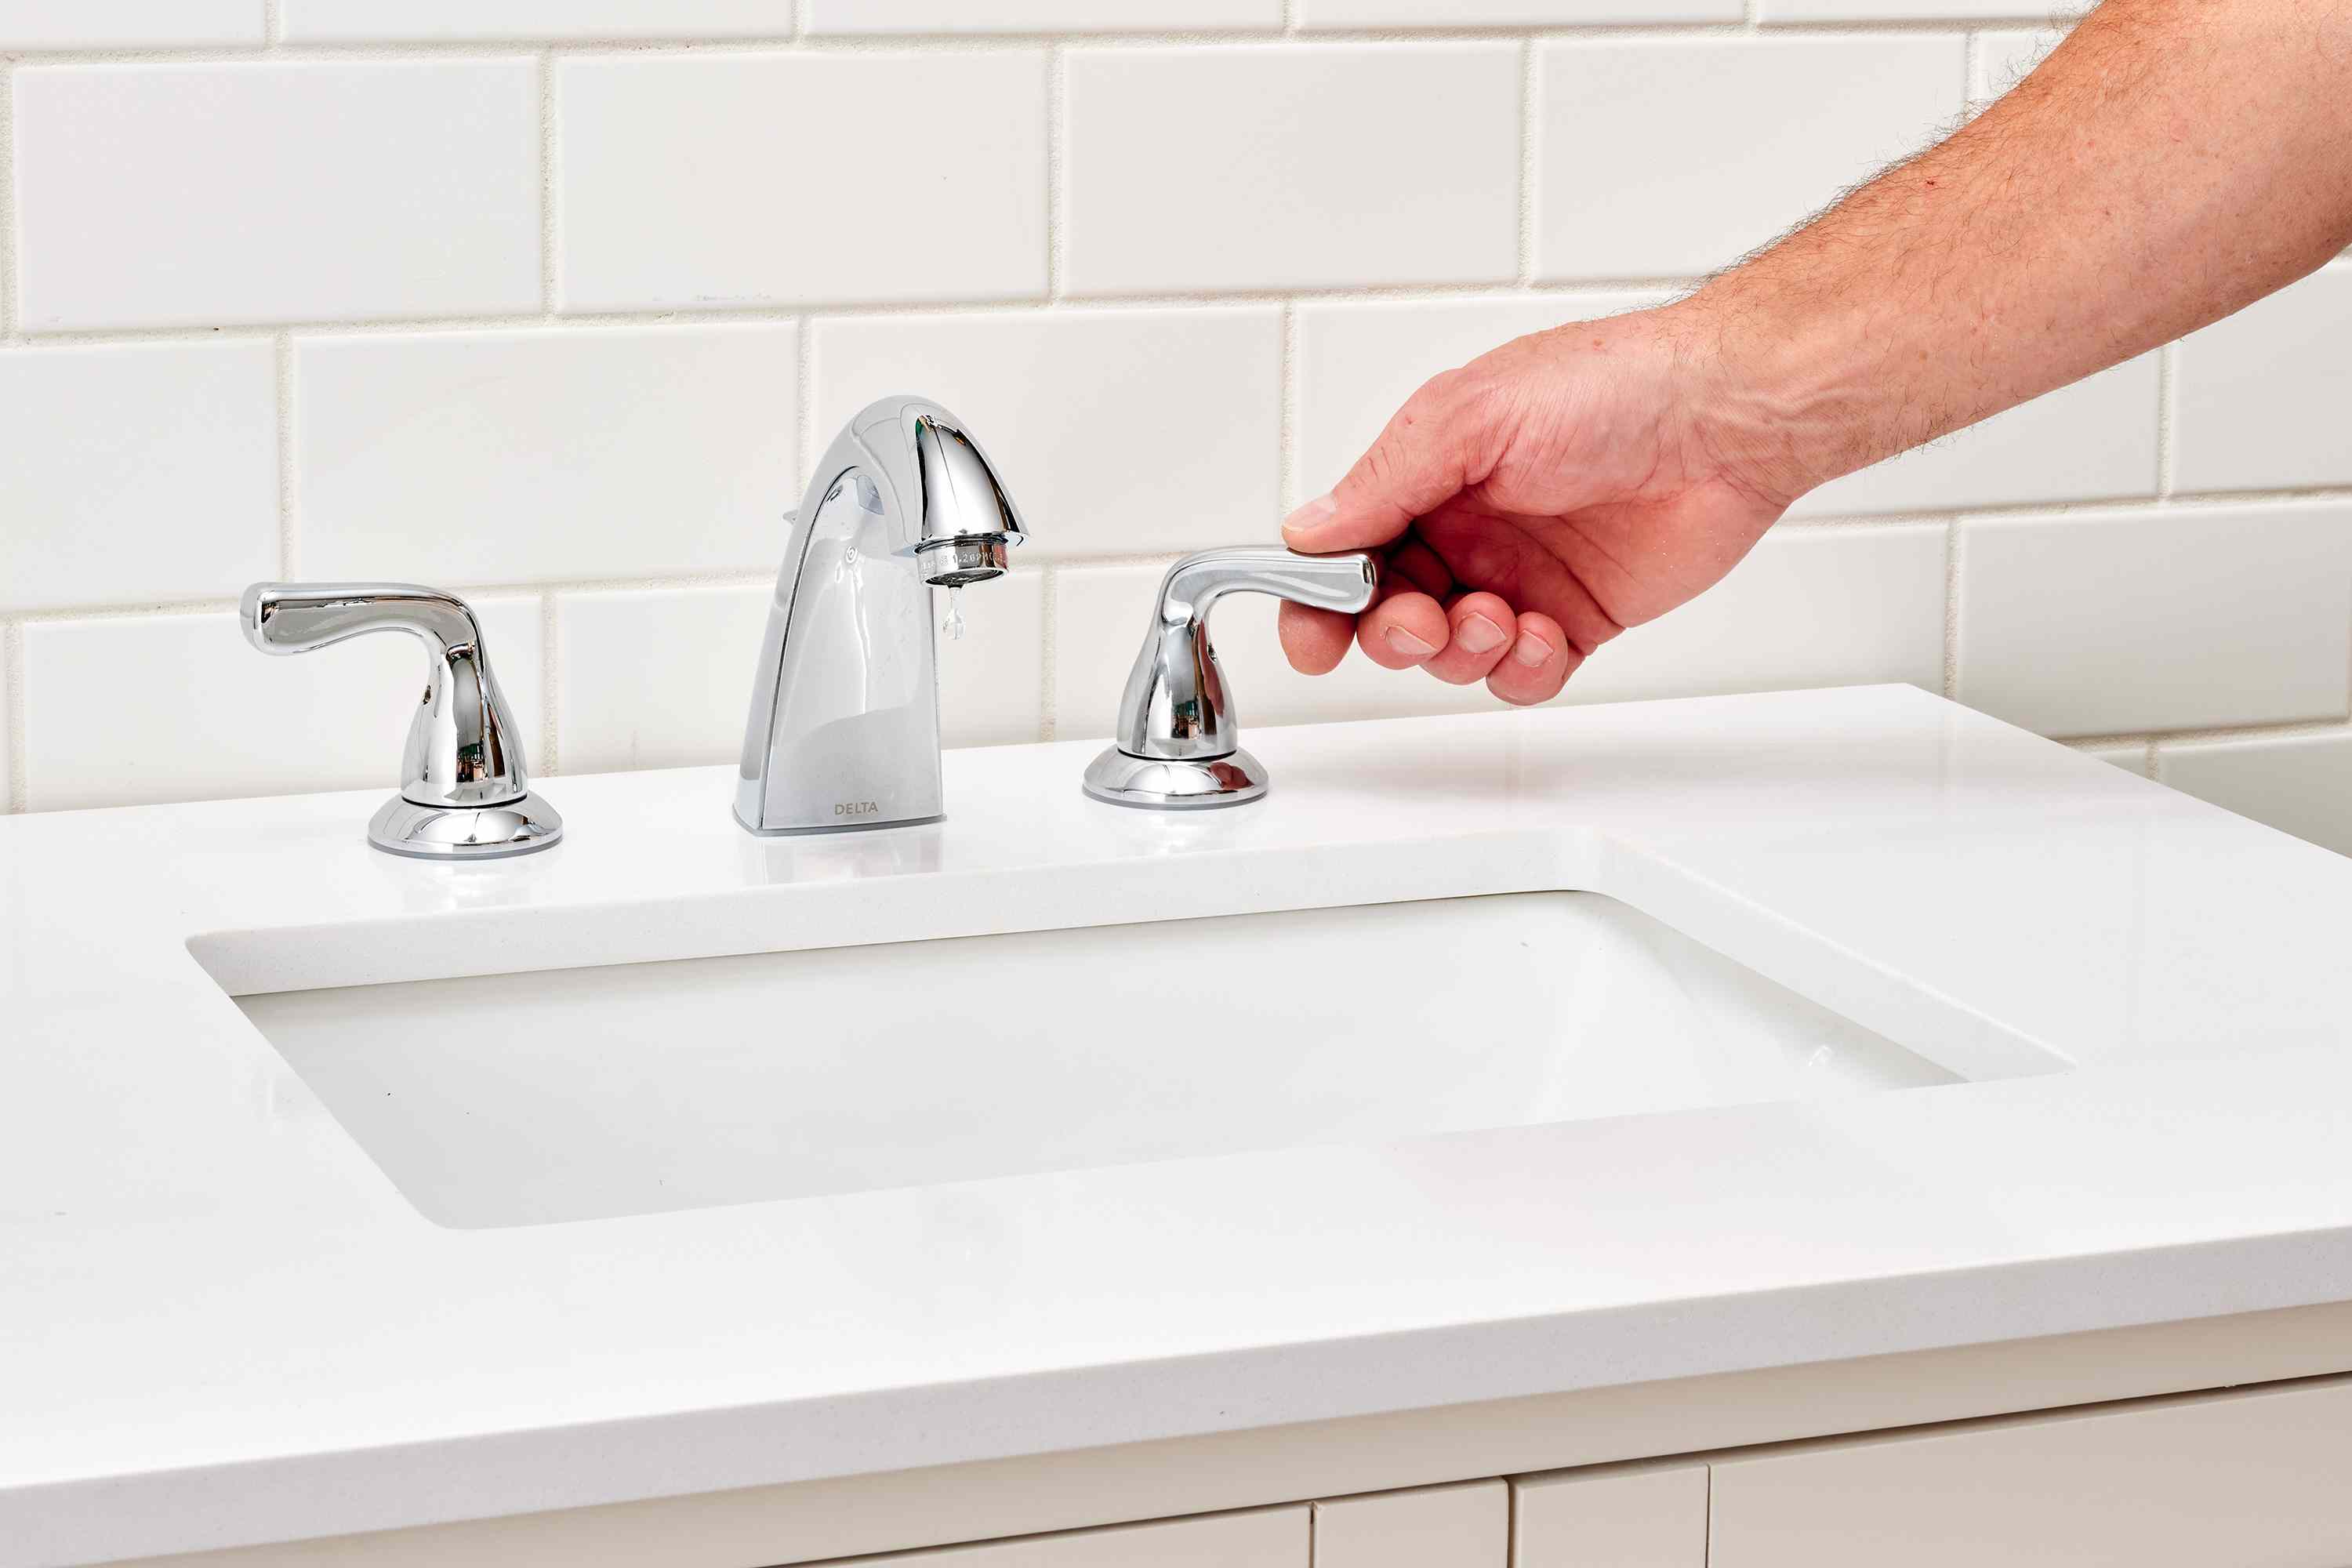 How To Remove Delta Faucet Handle